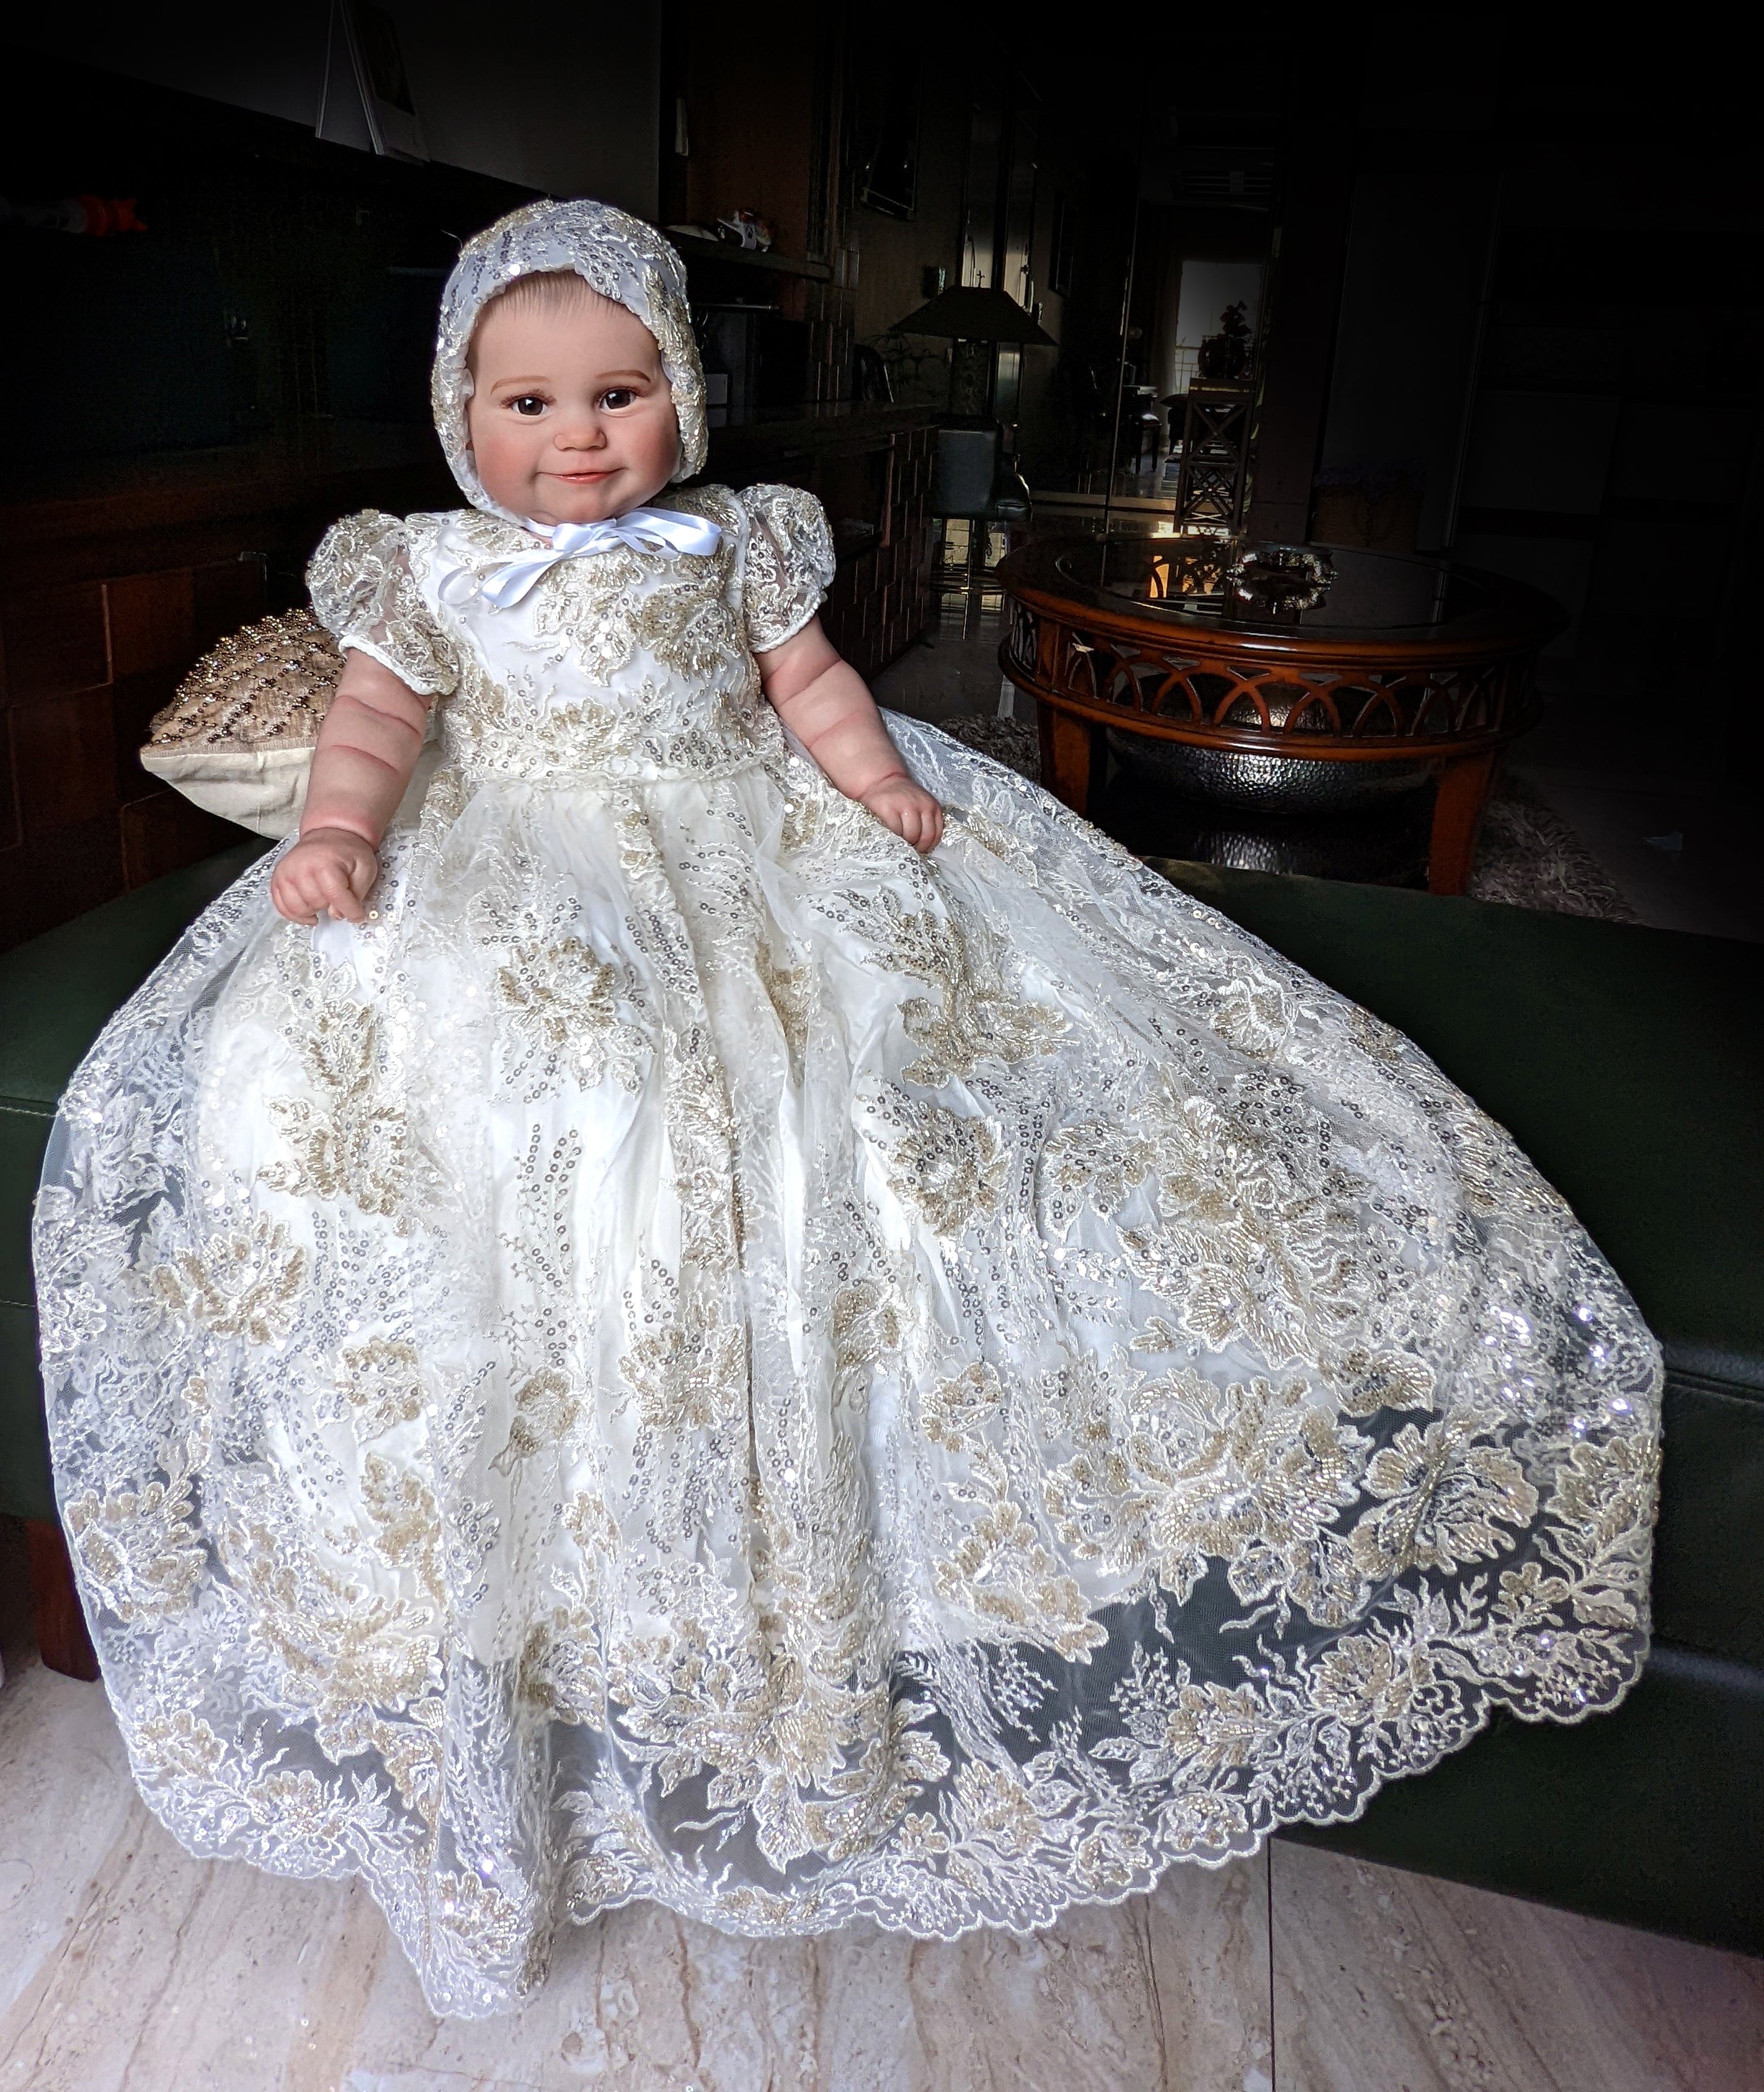 Extra Long Christening Gowns - One Small Child